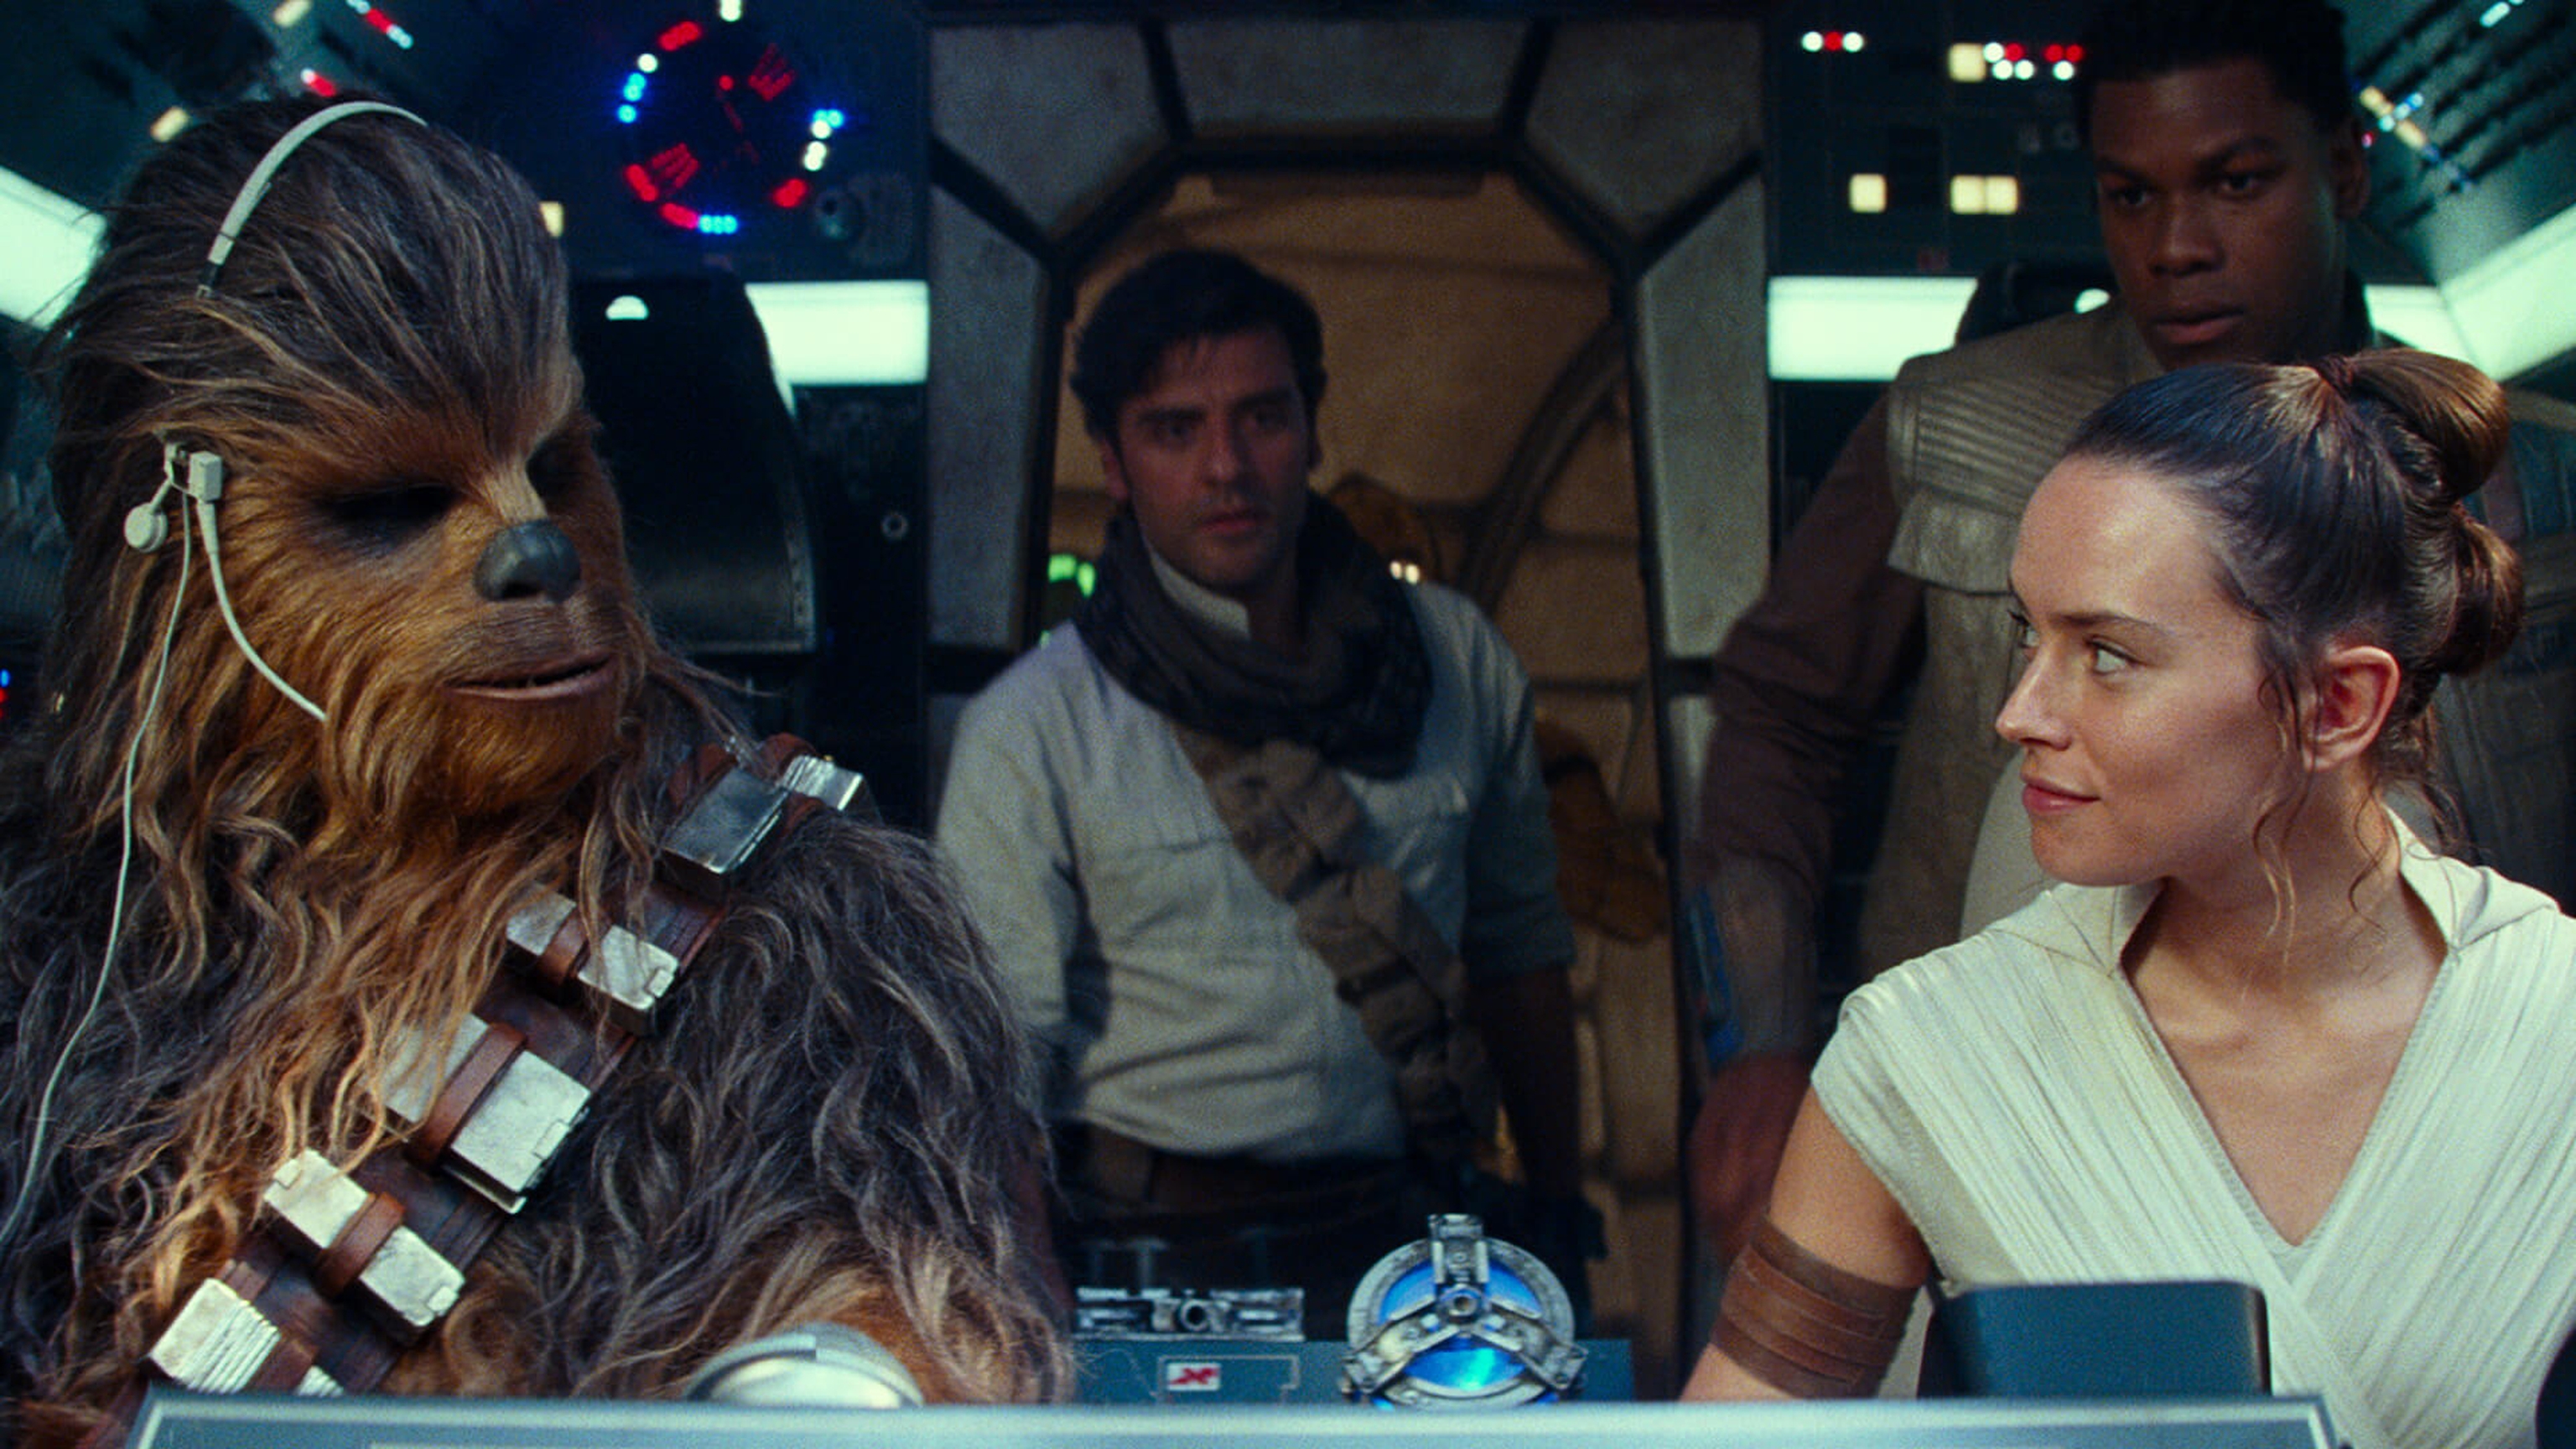 Four Star Wars characters piloting a spaceship